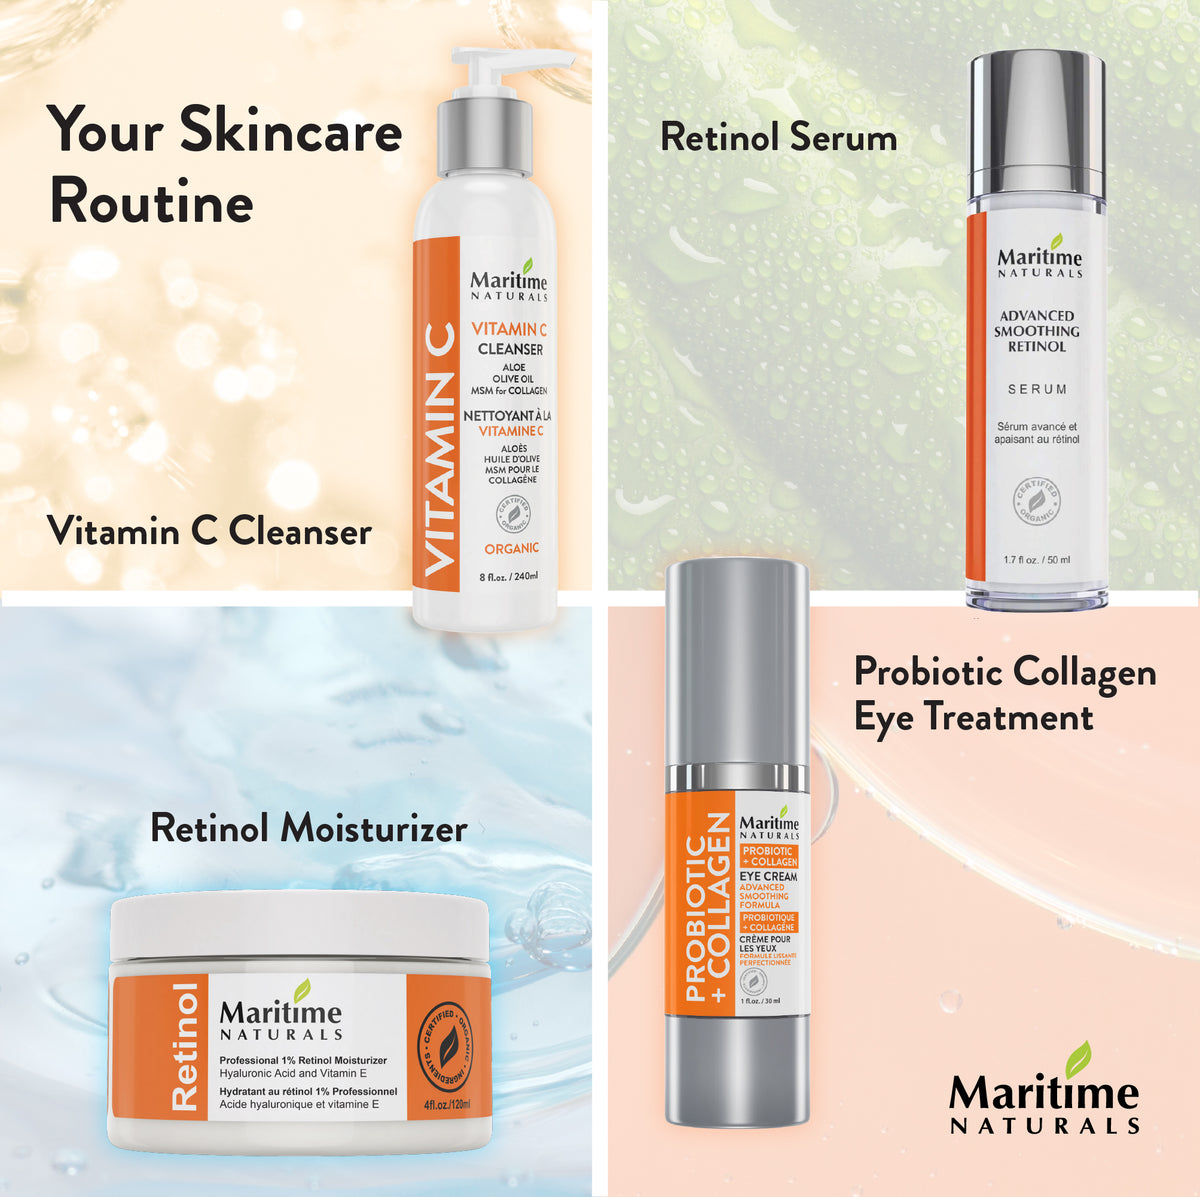 Elevate your skincare routine with maritime naturals